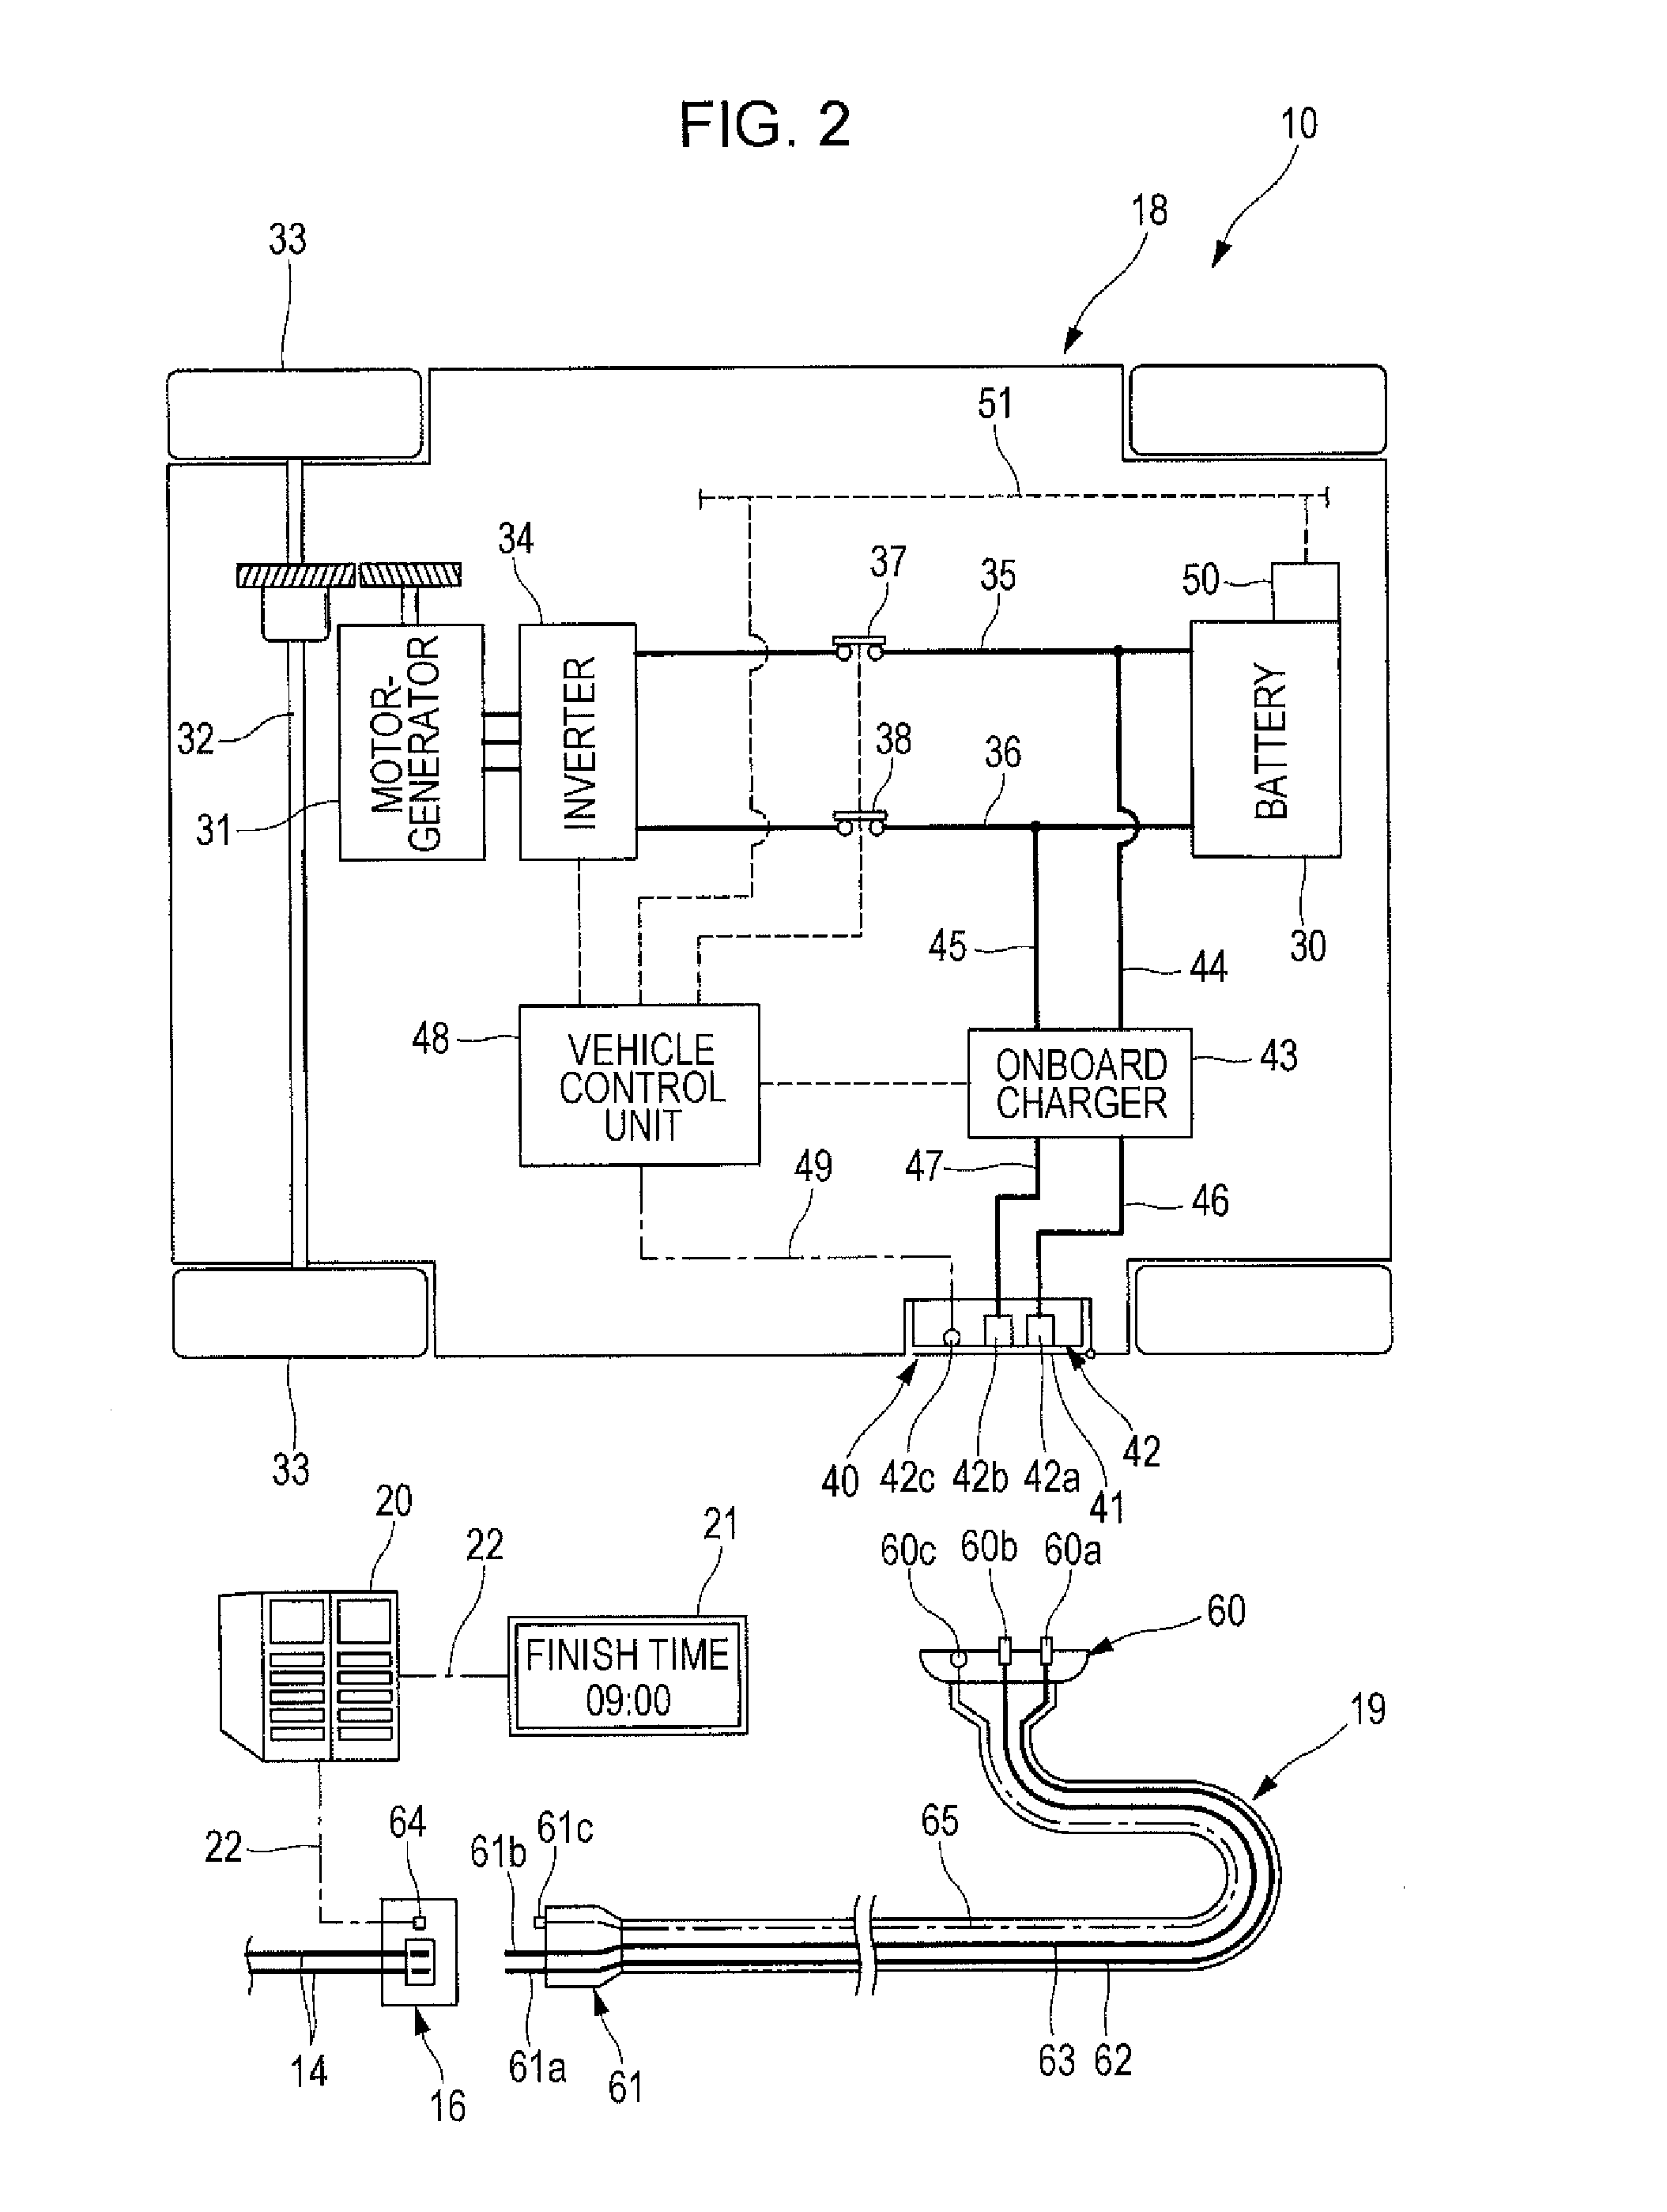 Power supply system, electric vehicle and charging adapter